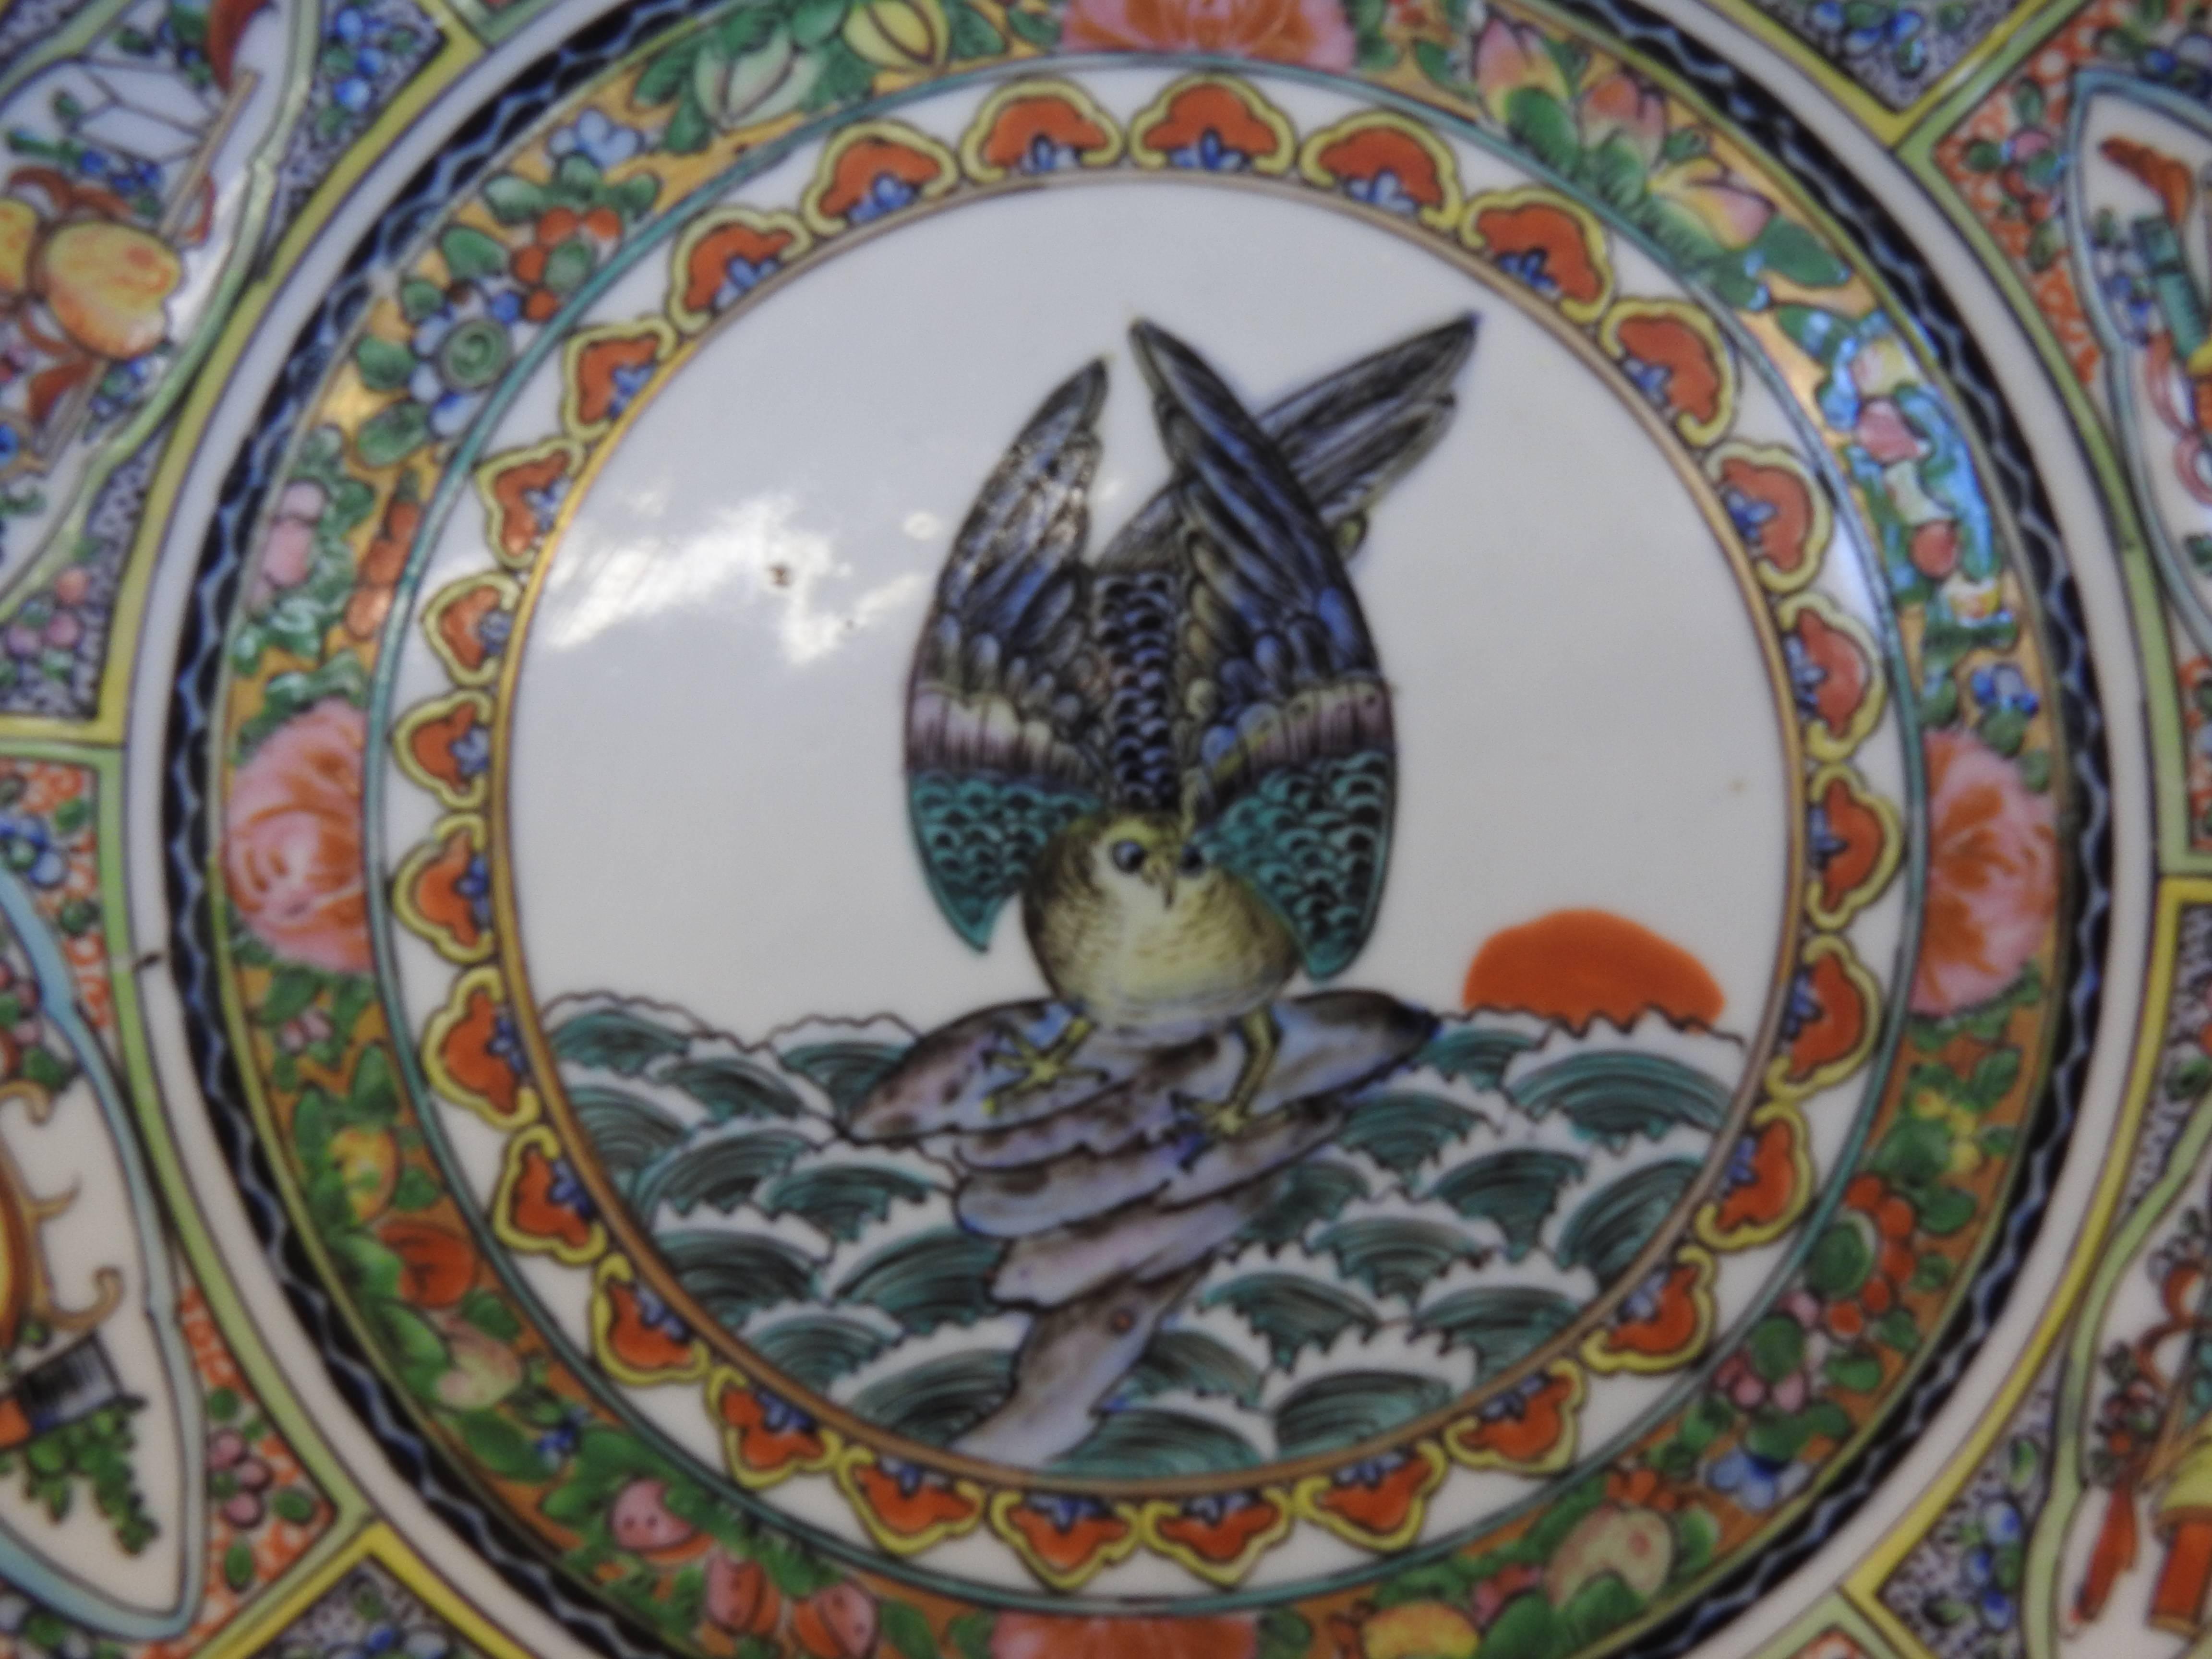 A pictorial owl appears ready to take flight in the intricately hand painted rose medallion plate. Beautiful colors surround the owl and have been highlighted with gold leaf.